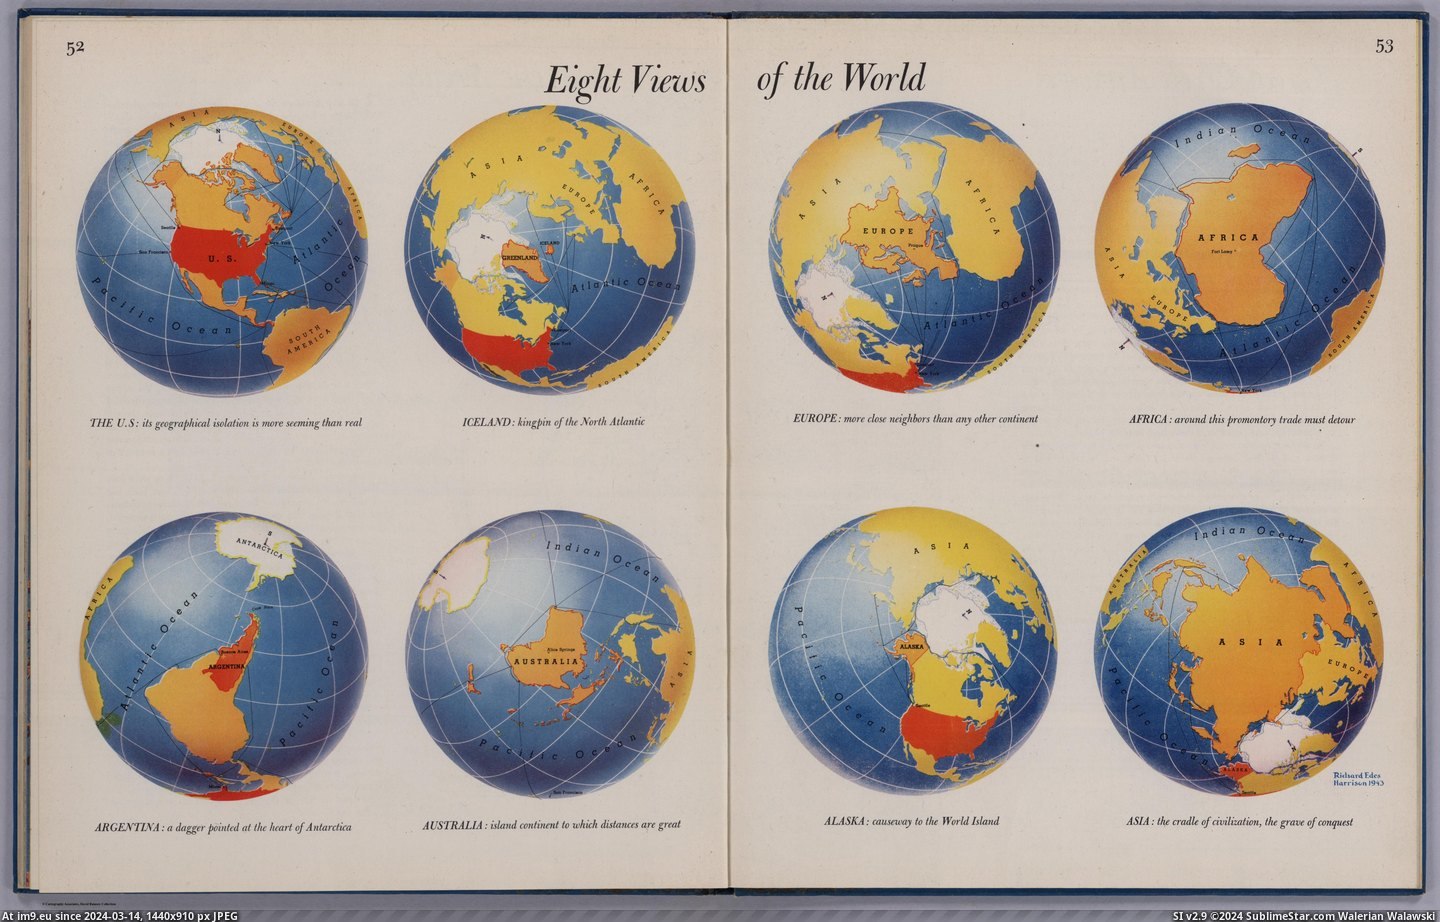 #World #Harrison #Richard [Mapporn] 8 views of the World, by Richard Harrison in 1943 [5509x3495] Pic. (Image of album My r/MAPS favs))